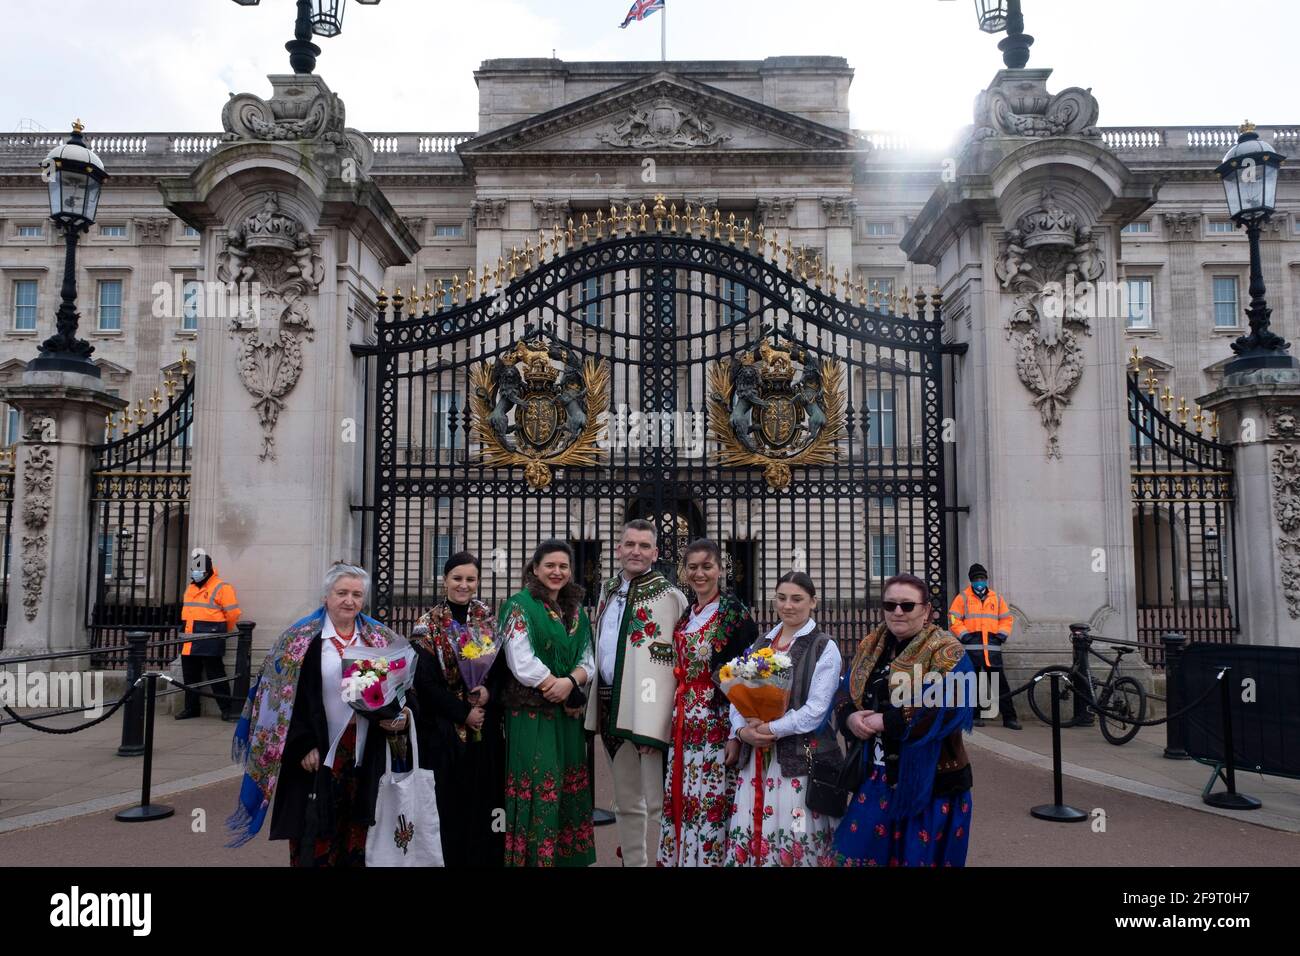 Polish family wearing traditional highlander dress arrive to lay floral tributes following the death of Prince Philip, Duke of Edingburgh outside Buckingham Palace on 11th April 2021 in London, United Kingdom. Members of the public have been laying flowers outside the gates of the royal residence following his passing at the age of 99 on 9th April 2021. Prince Philip, Duke of Edinburgh was a member of the British royal family as the husband of Elizabeth II. Philip was born into the Greek and Danish royal families. Stock Photo